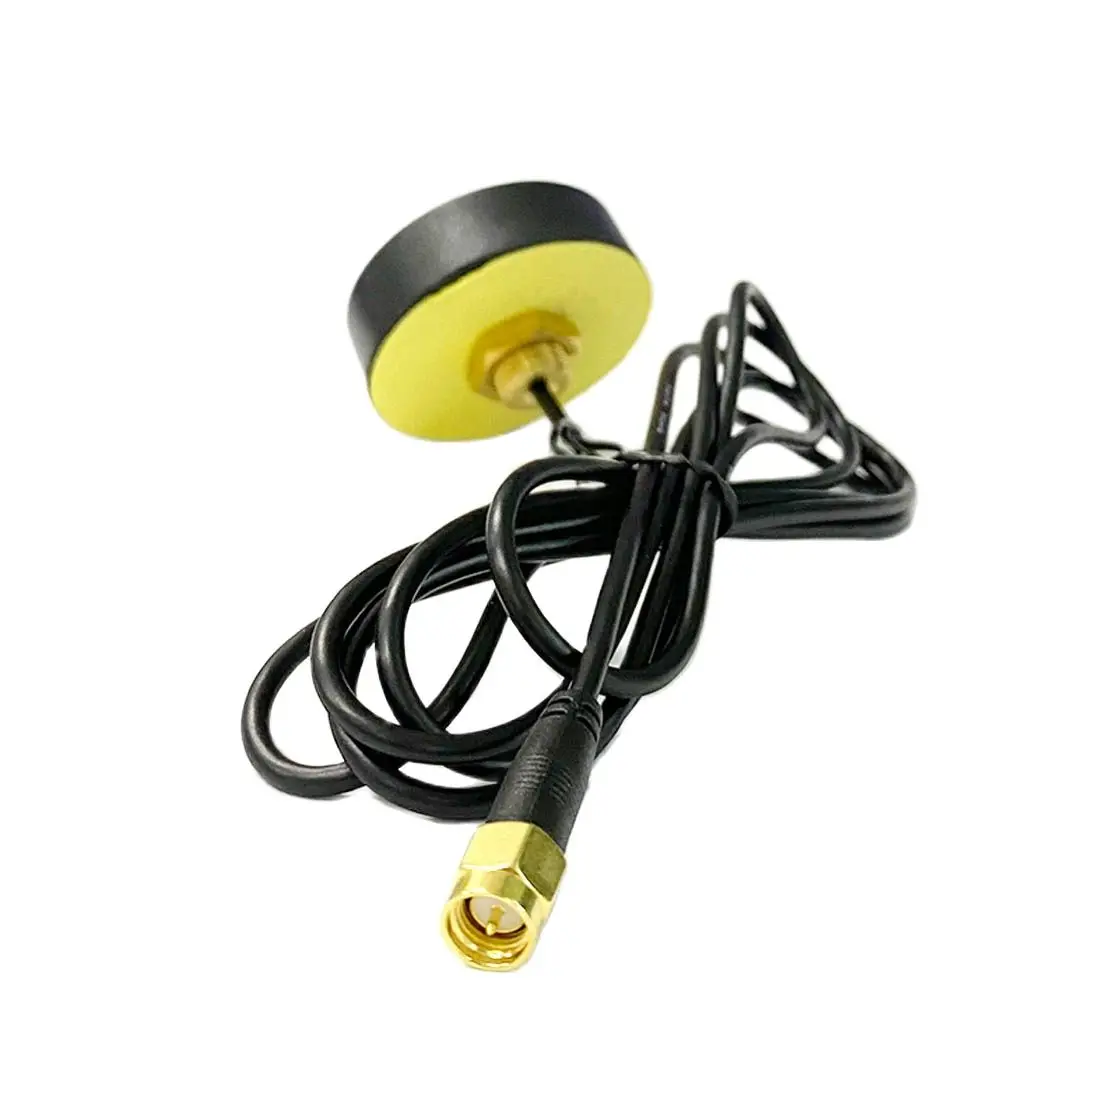 

1pc 433Mhz 3dbi Antenna DTU Cabinet Aerial OMNI Waterproof With 1.2m Extension Cable SMA Male for Ham Radio